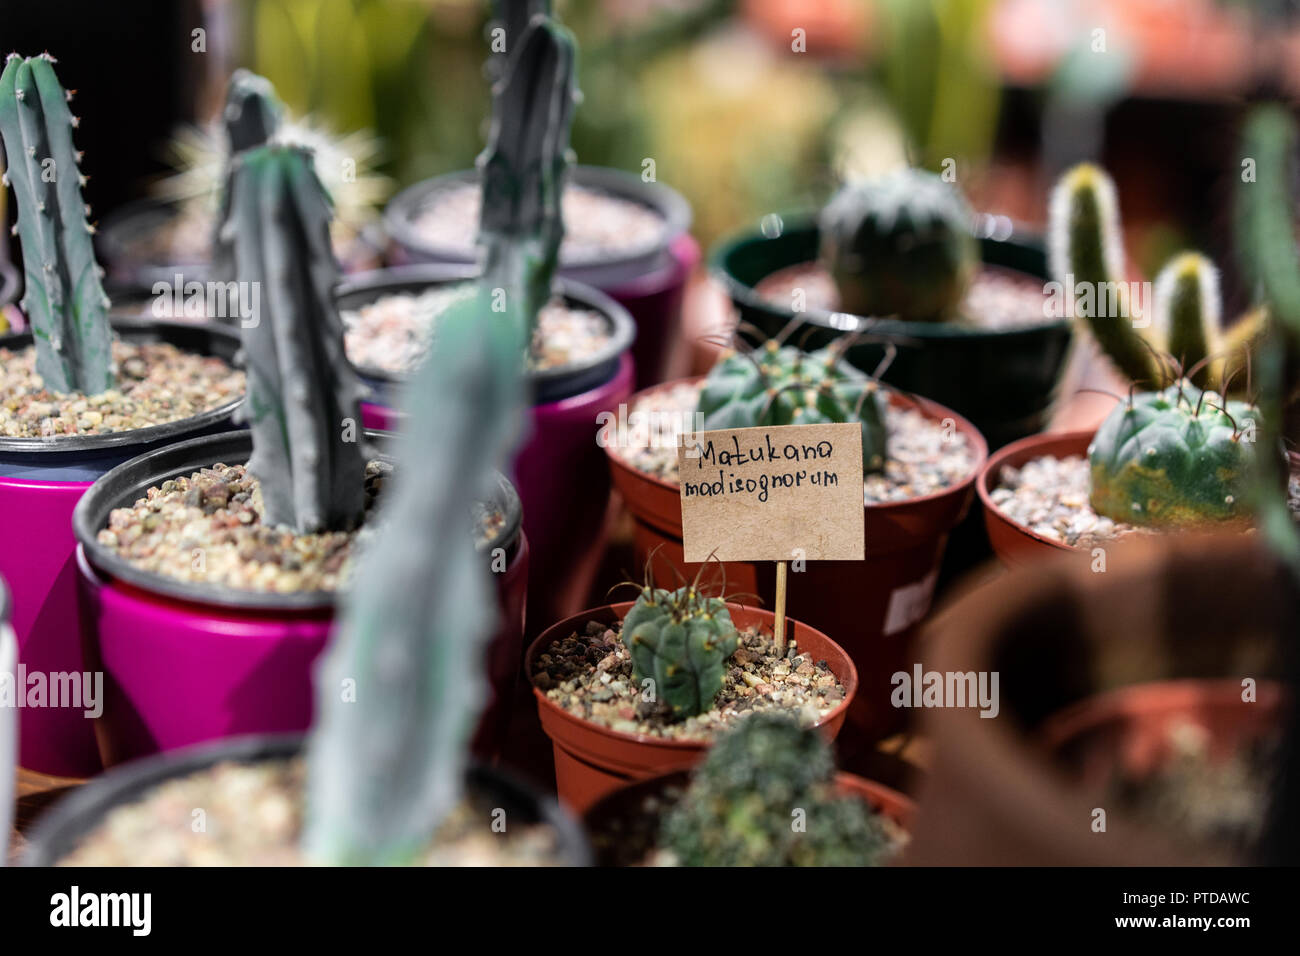 Green succulent in a clay pot with price in loft interior in scandinavian style. Stock Photo